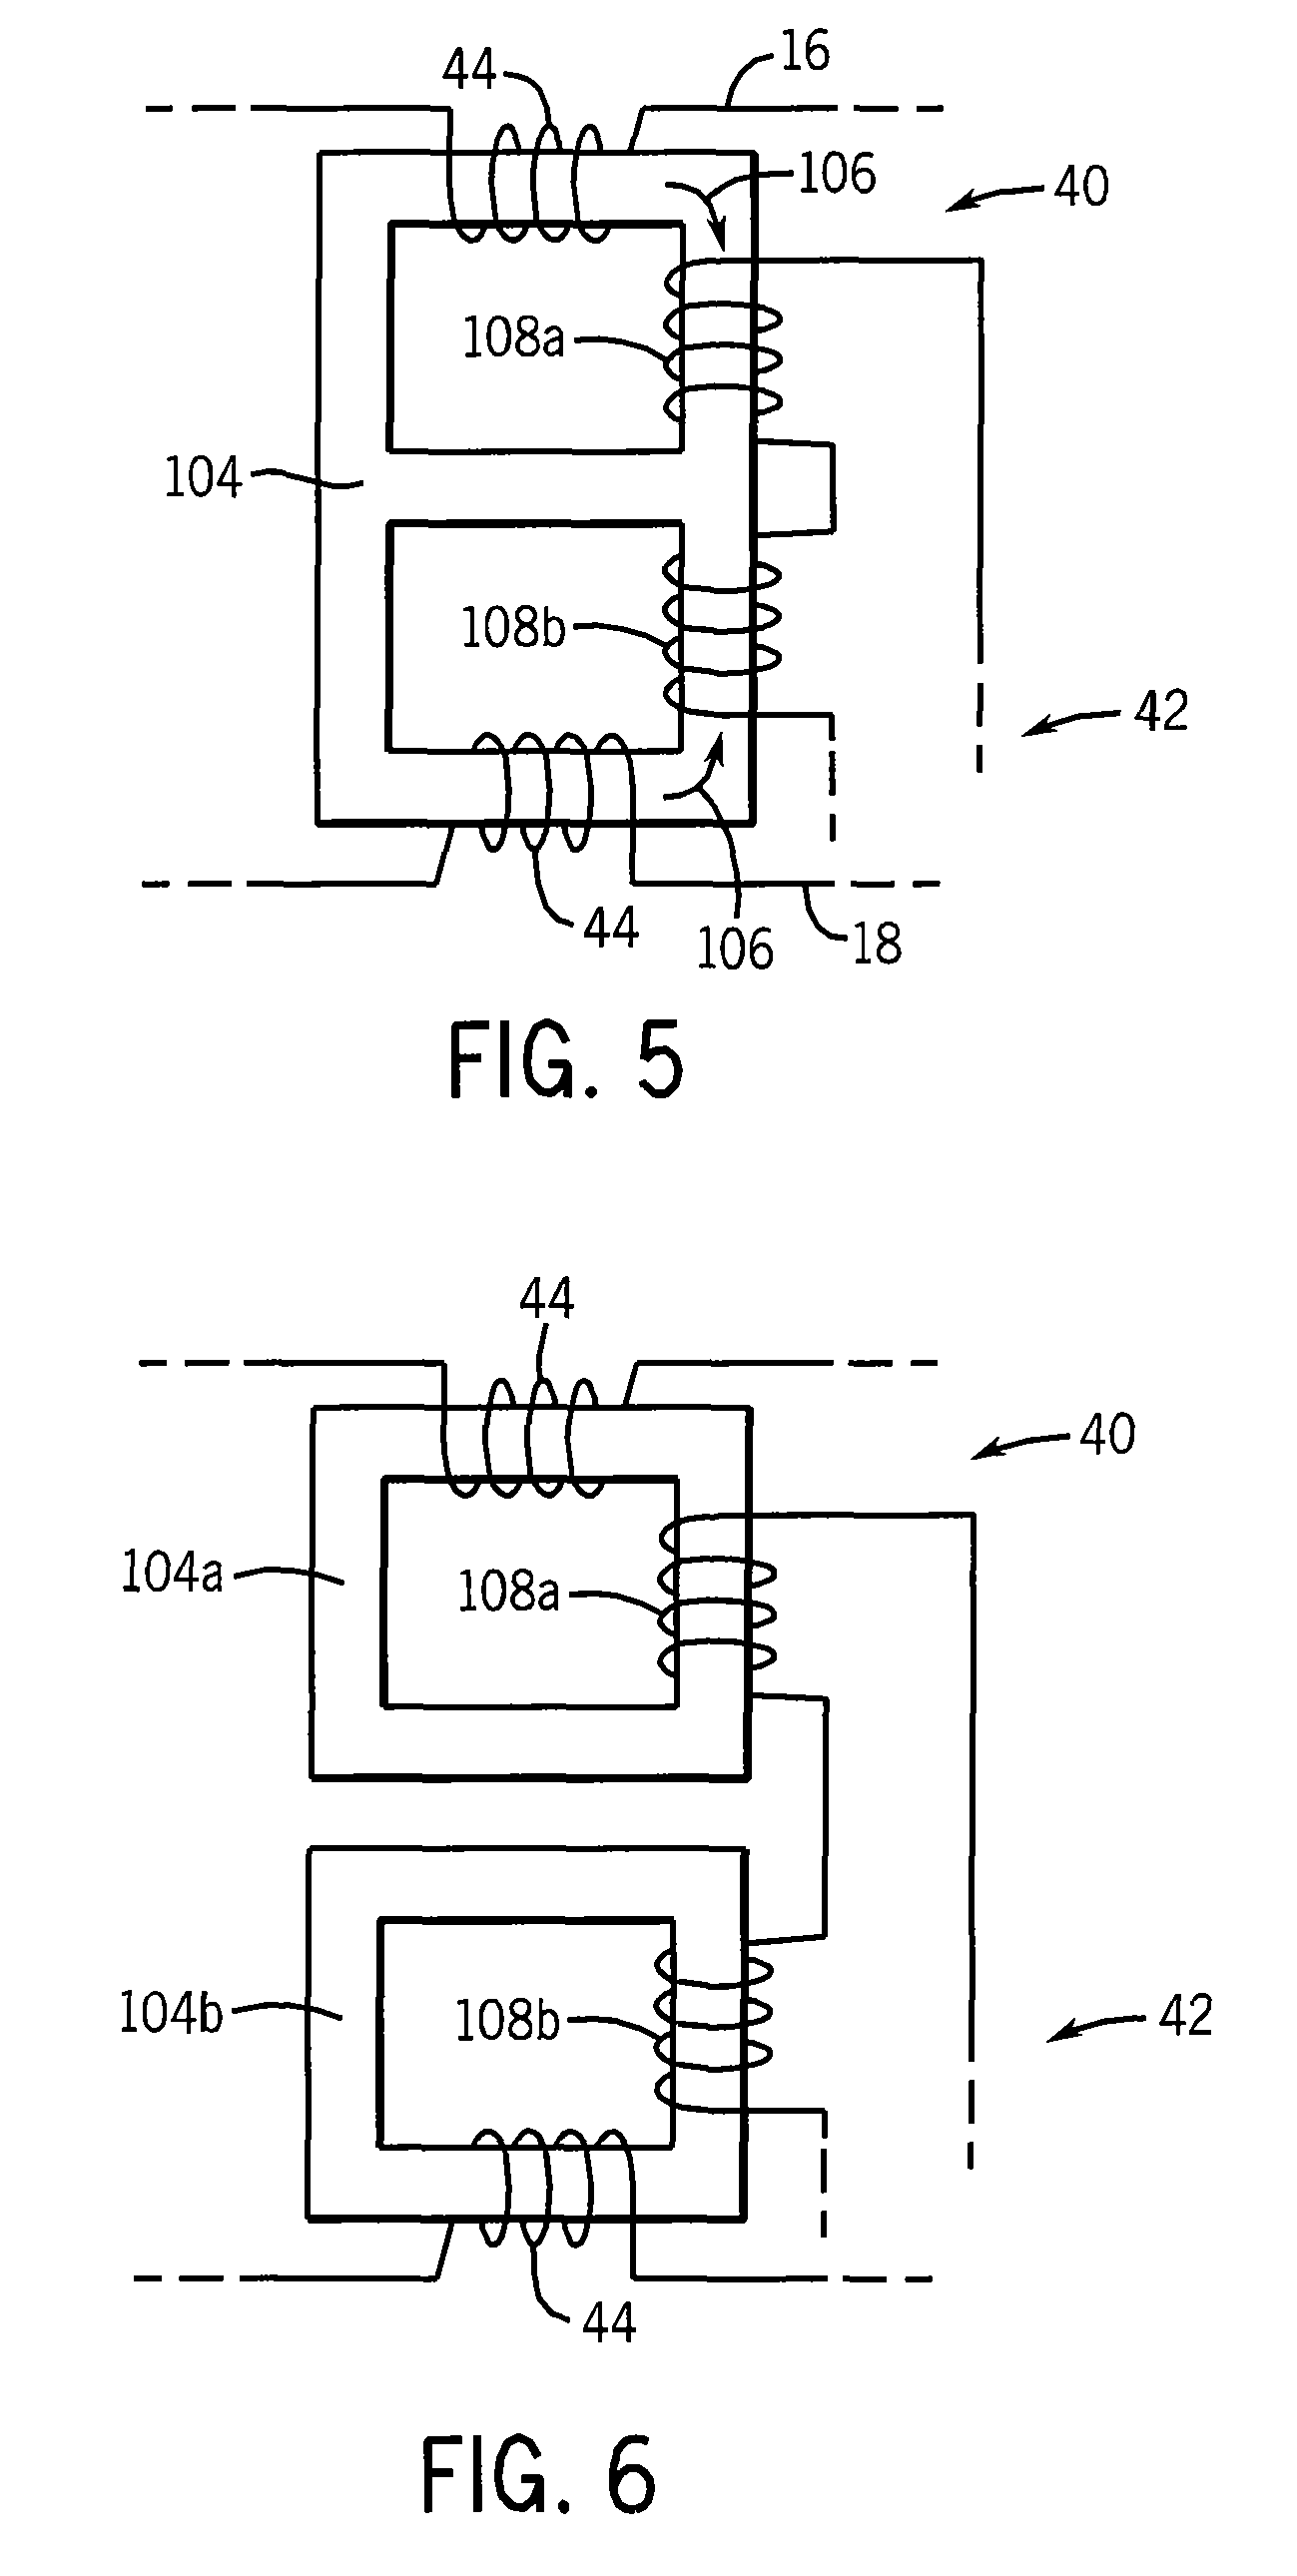 Method and apparatus for detecting a location of ground faults in a motor/motor drive combination